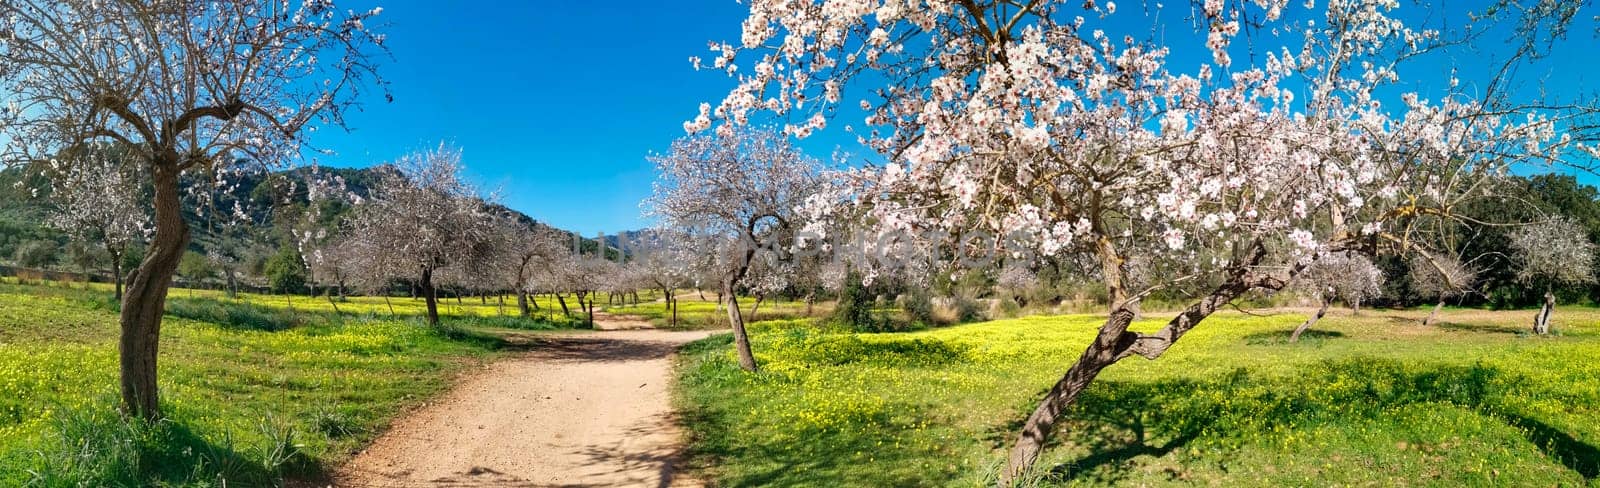 Spring's Awakening: Blossoming Almond Trees Lining a Rustic Country Path by Juanjo39